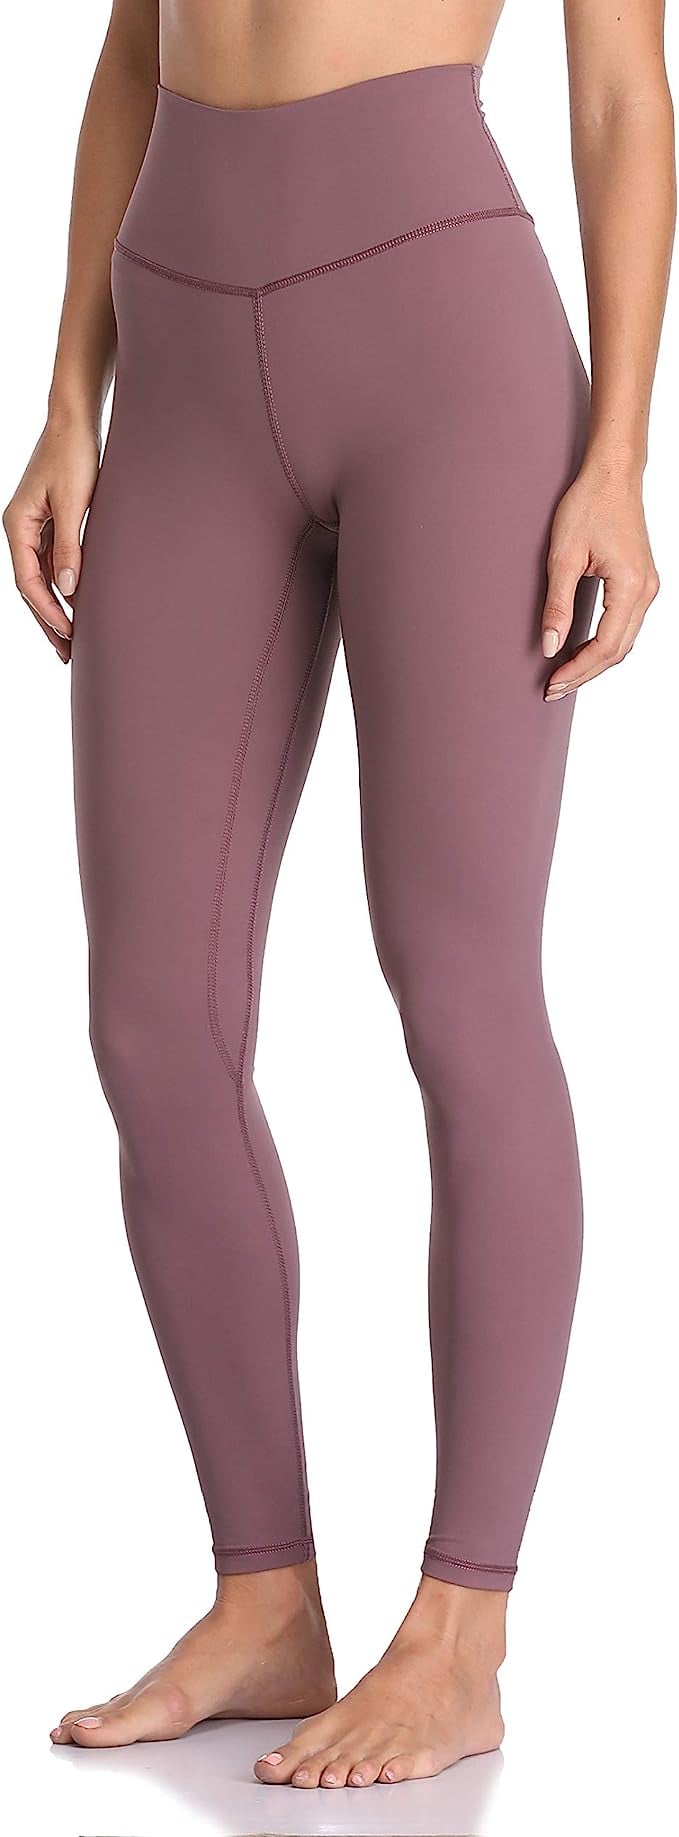 Best Prime Day Workout Clothes and Sneaker Deals: Colorfulkoala High Waisted Full-Length Leggings